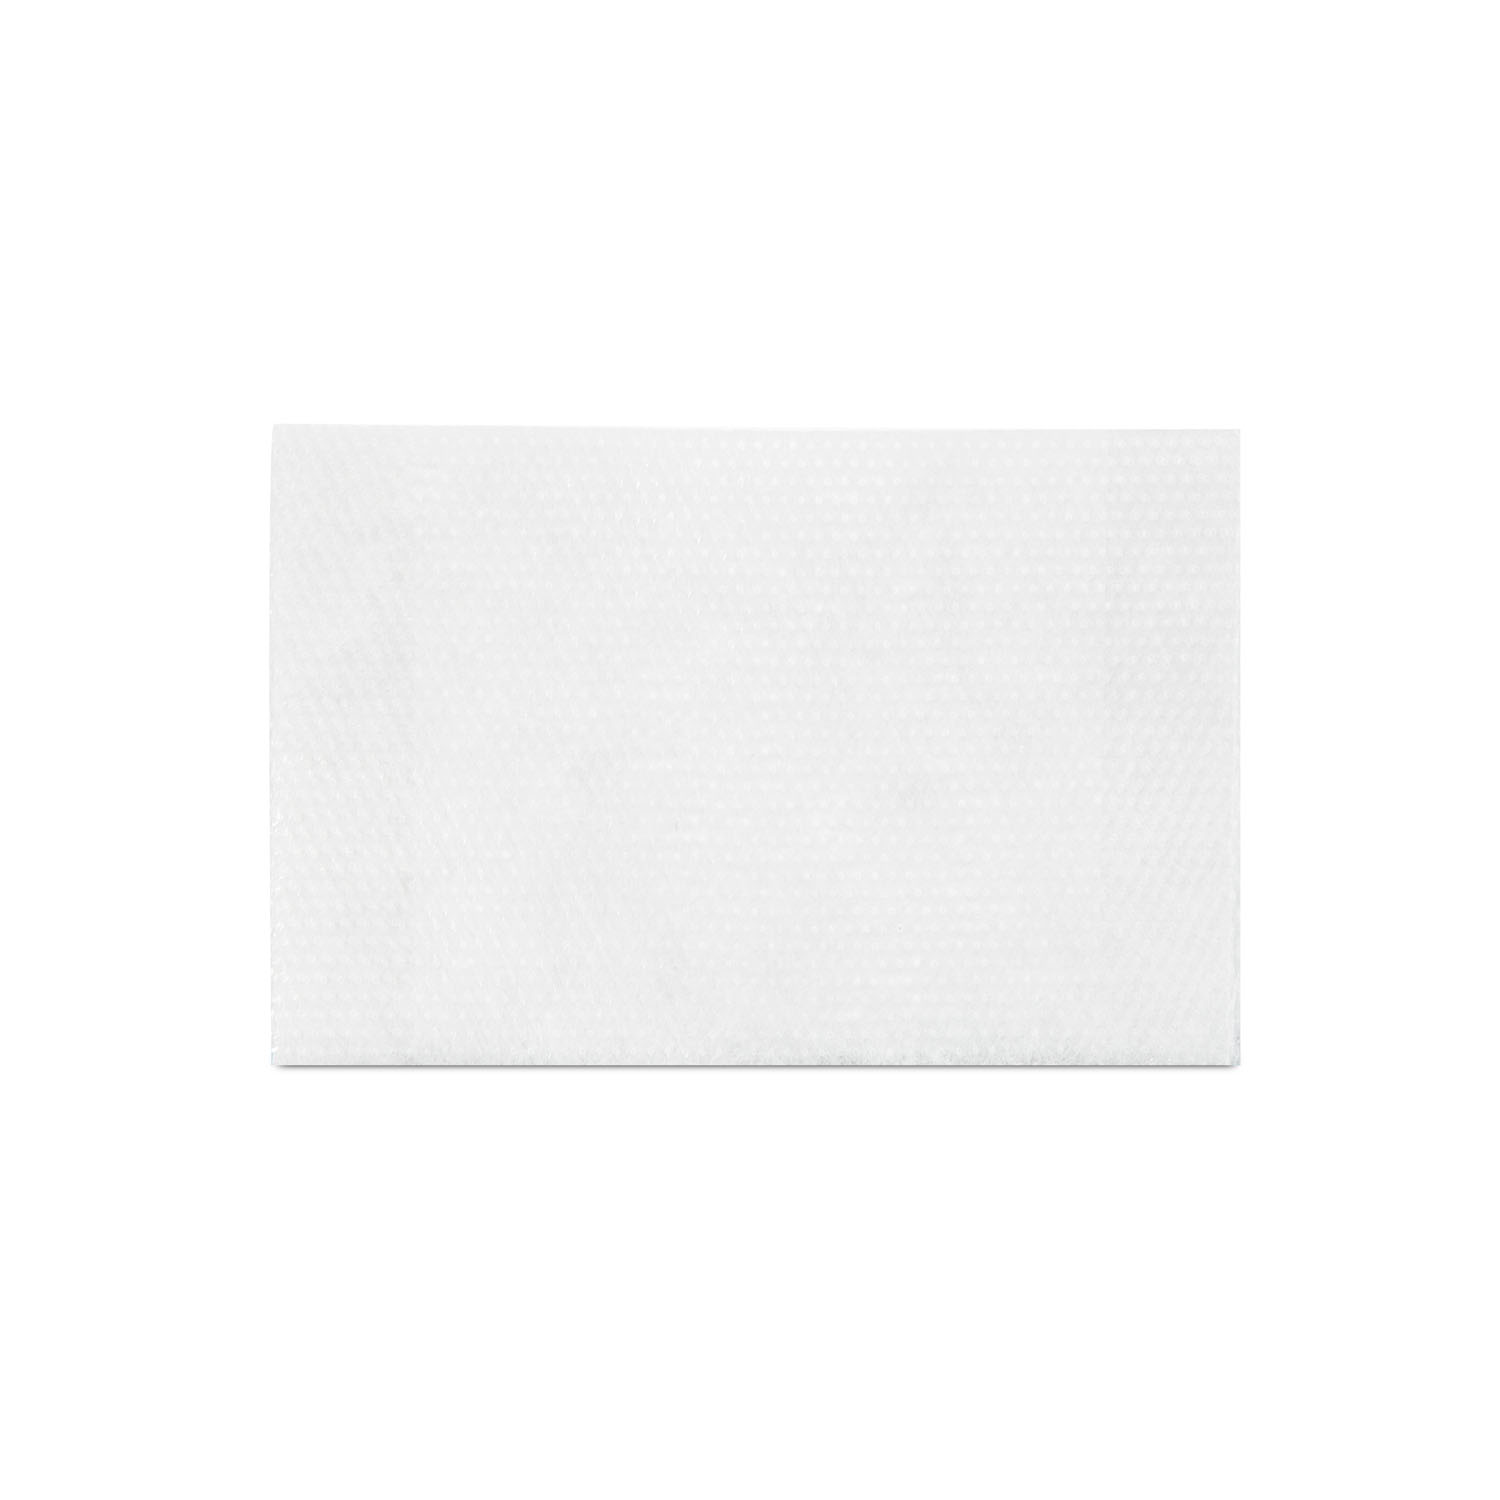 DUKAL NON-ADHERENT PAD WITH ADHESIVE : 7665033 BX $9.75 Stocked